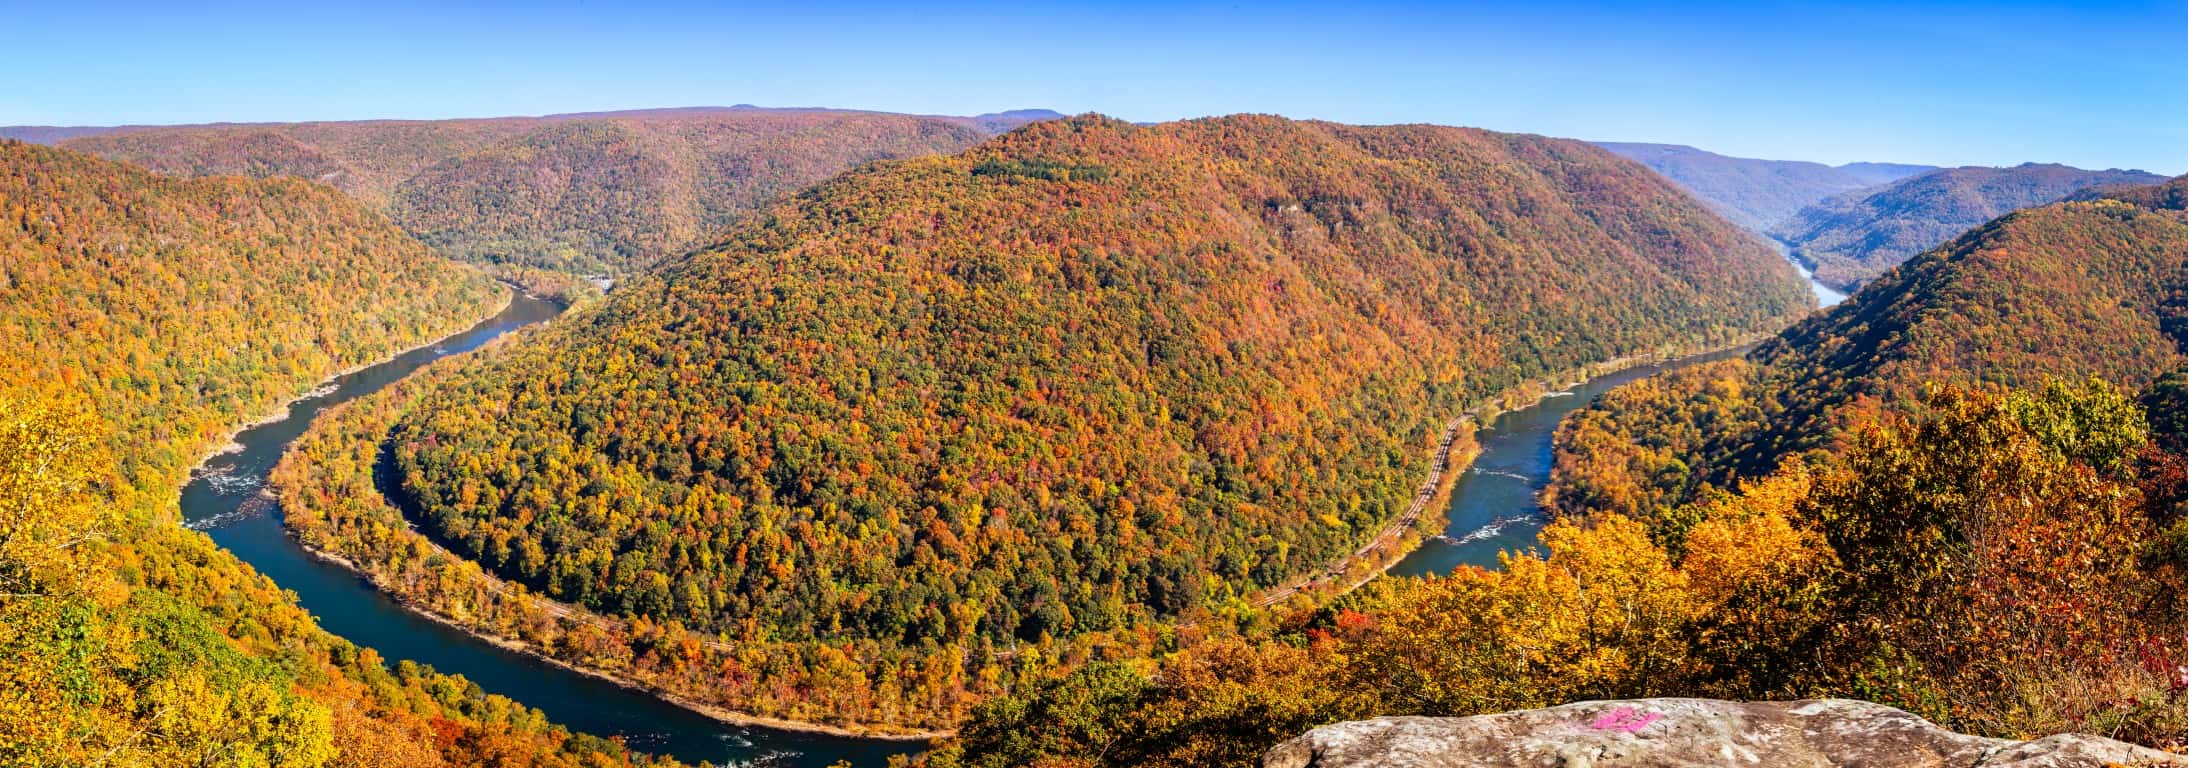 Autumn's Reveal at New River G... by Andrew Parlette